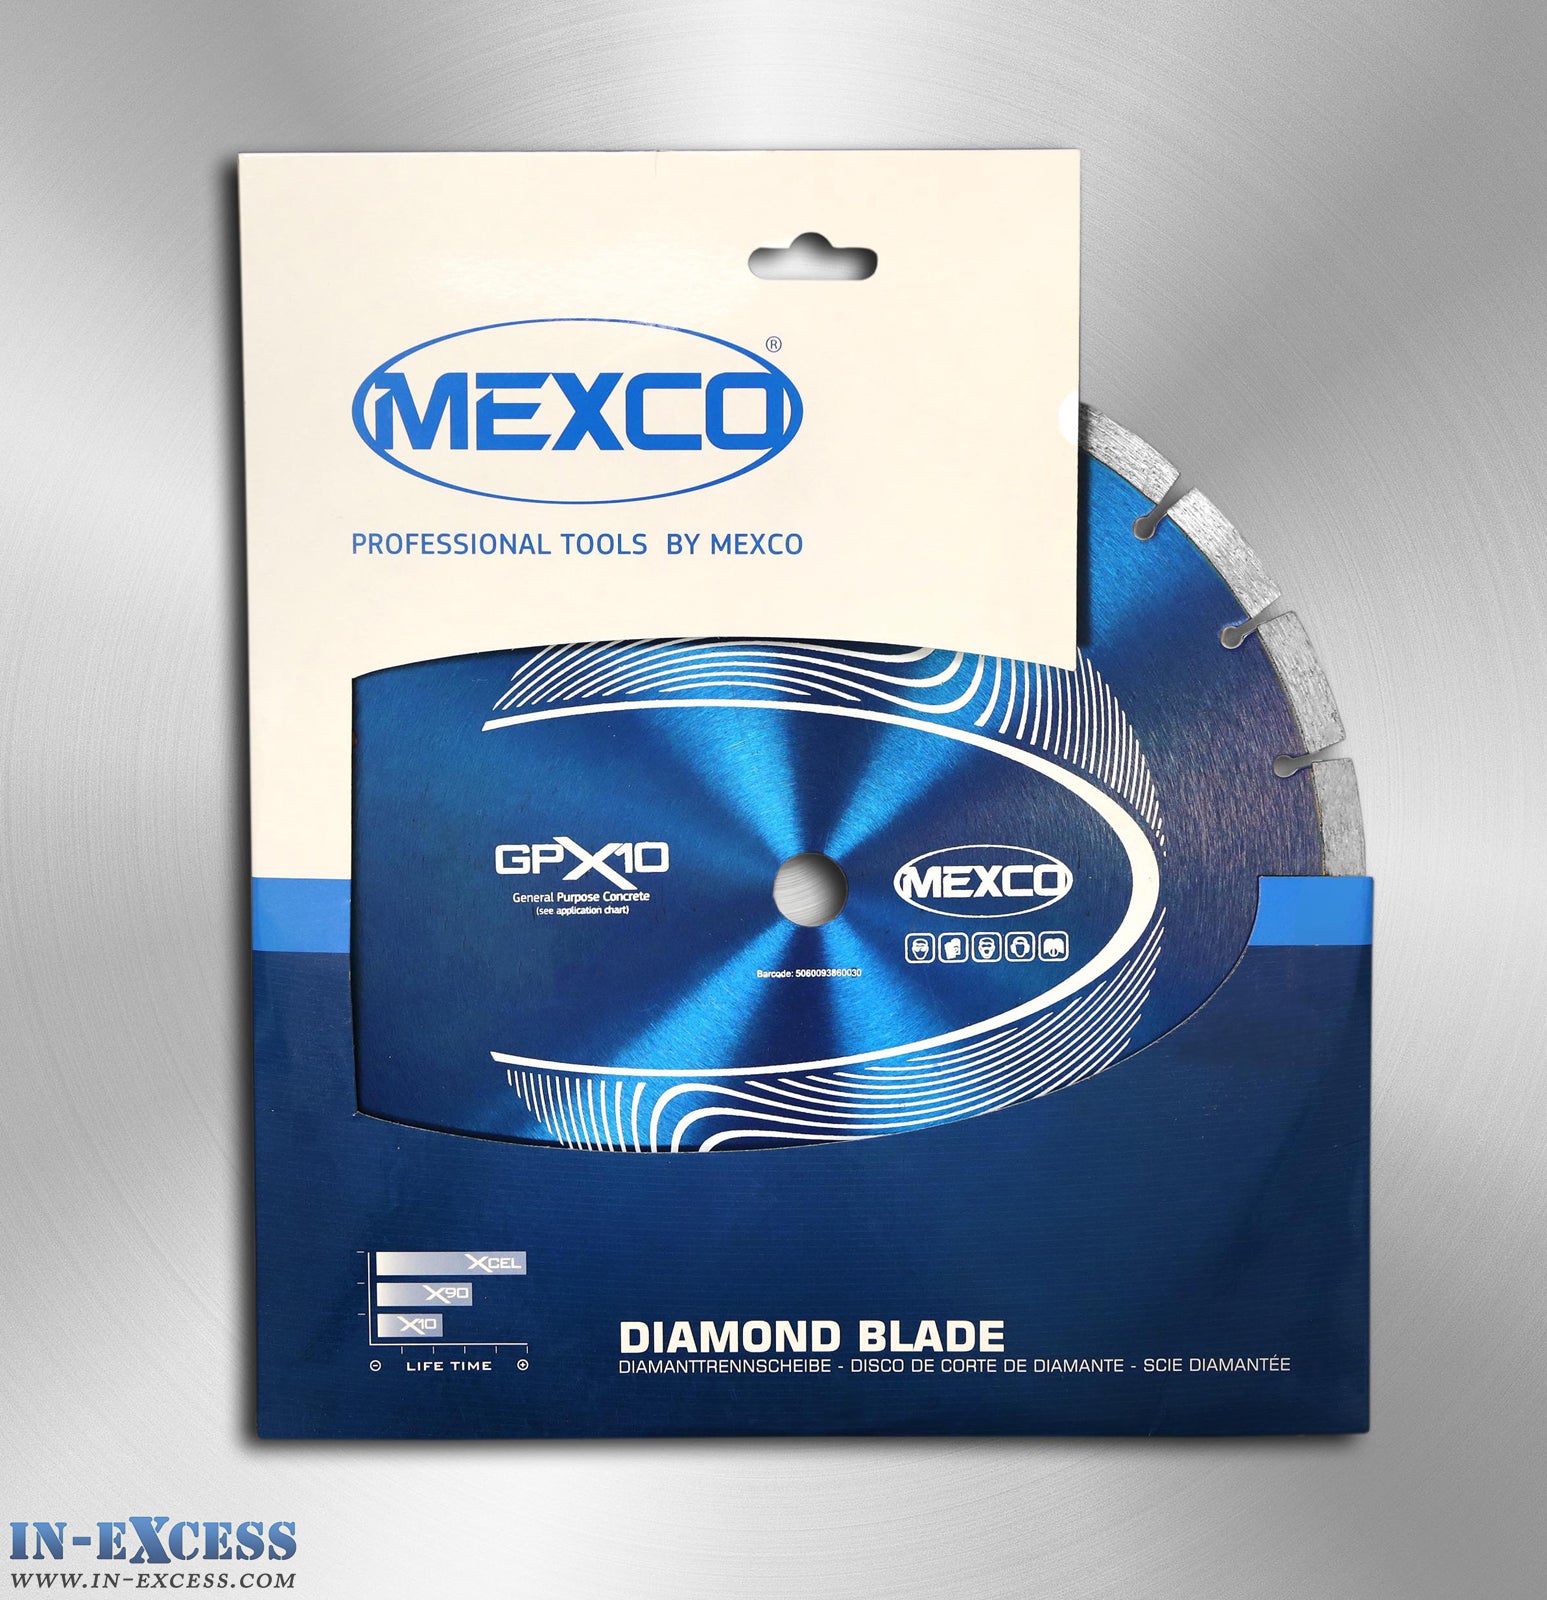 Mexco Professional GPX10 Diamond Cutting Disc for Concrete 230mm